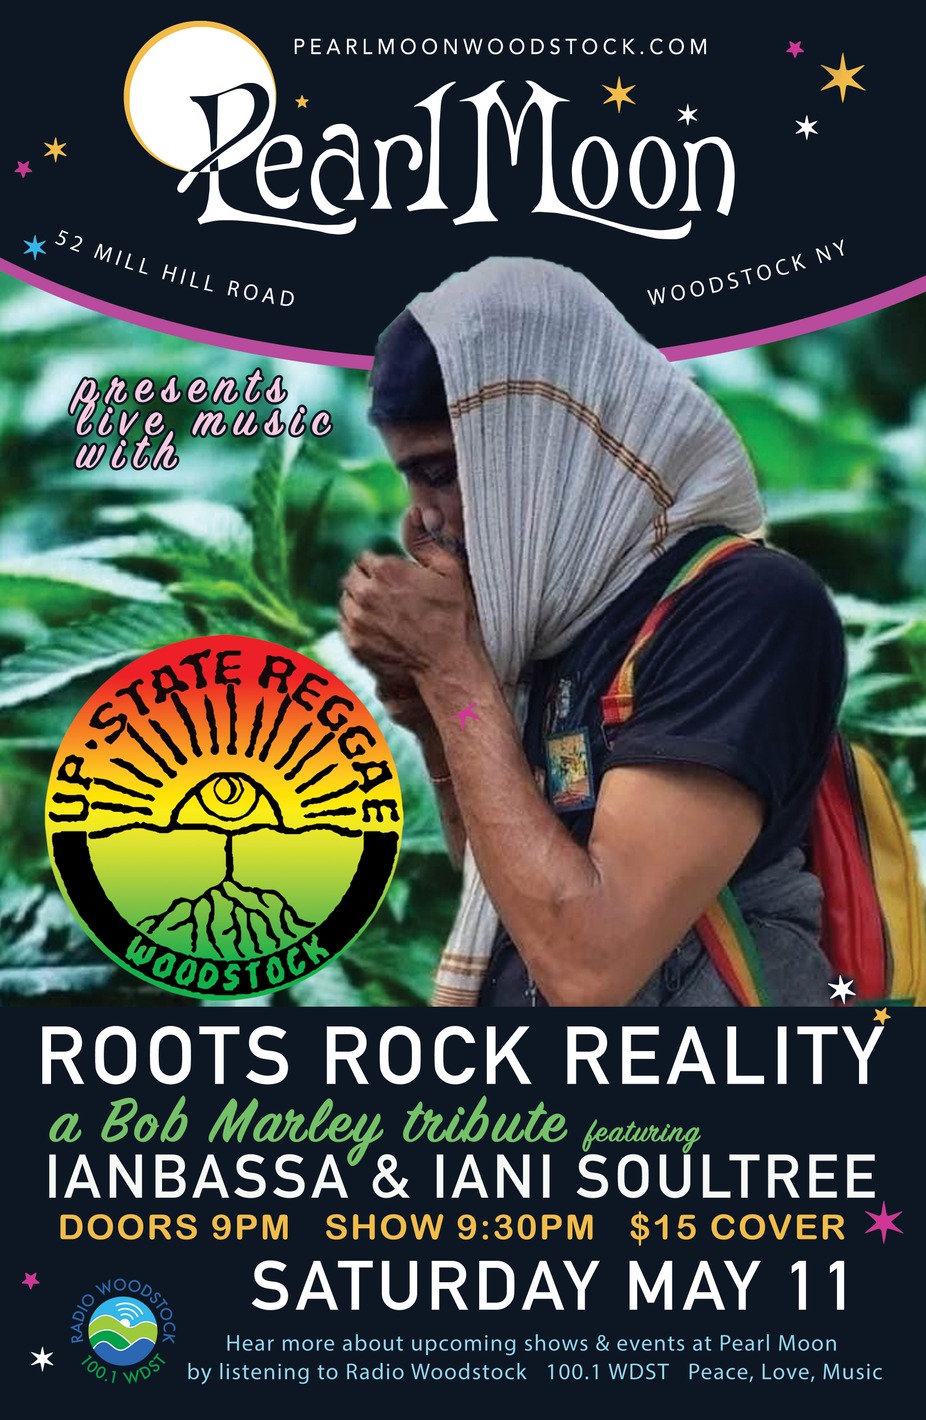 ROOTS, ROCK, REALITY: A BOB MARLEY TRIBUTE at PEARL MOON WOODSTOCK event photo